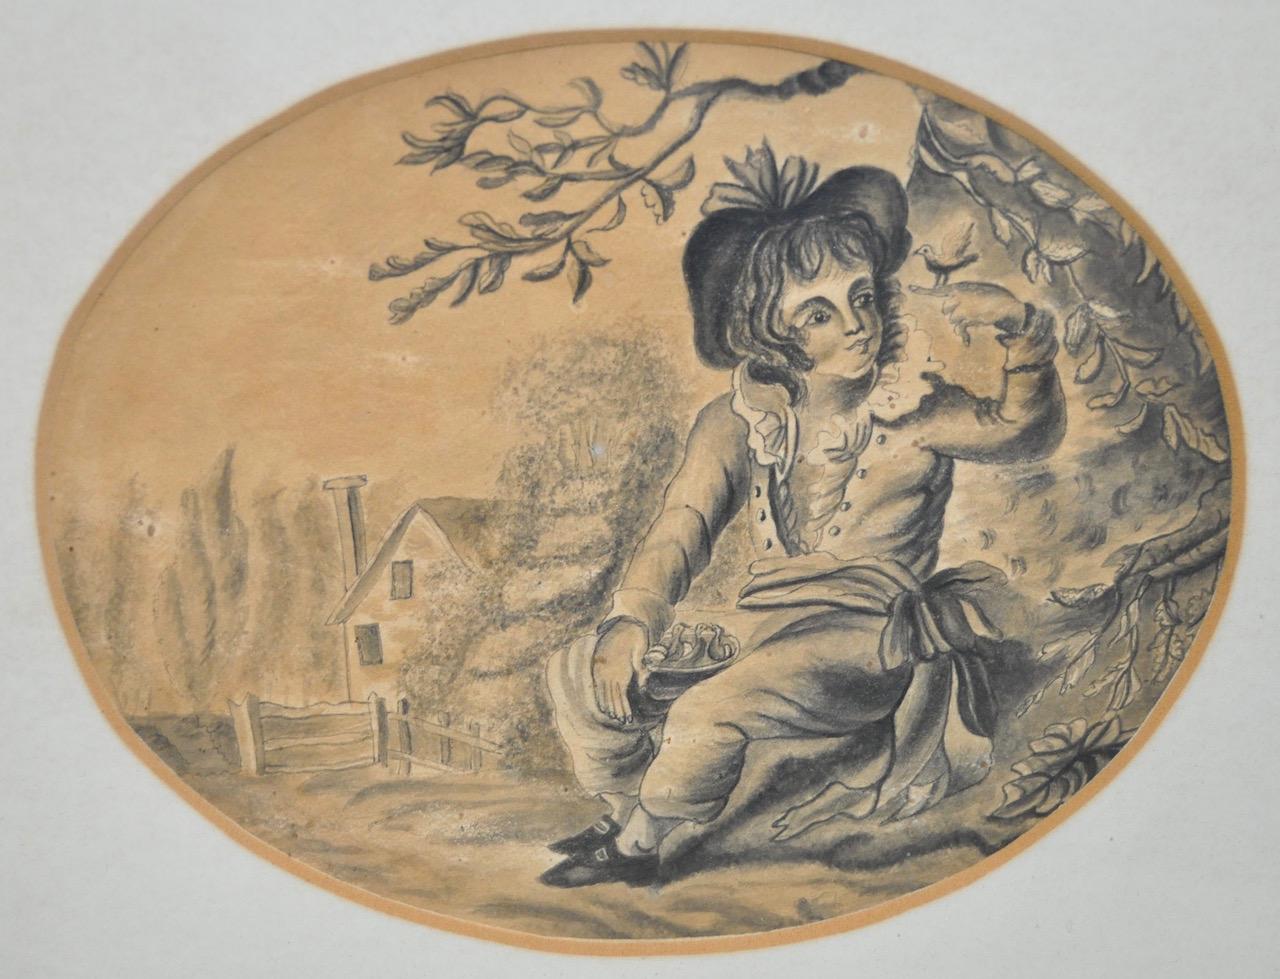 Charming early 19th century Graphite Portrait of a Young Boy with Birds - Art by Unknown